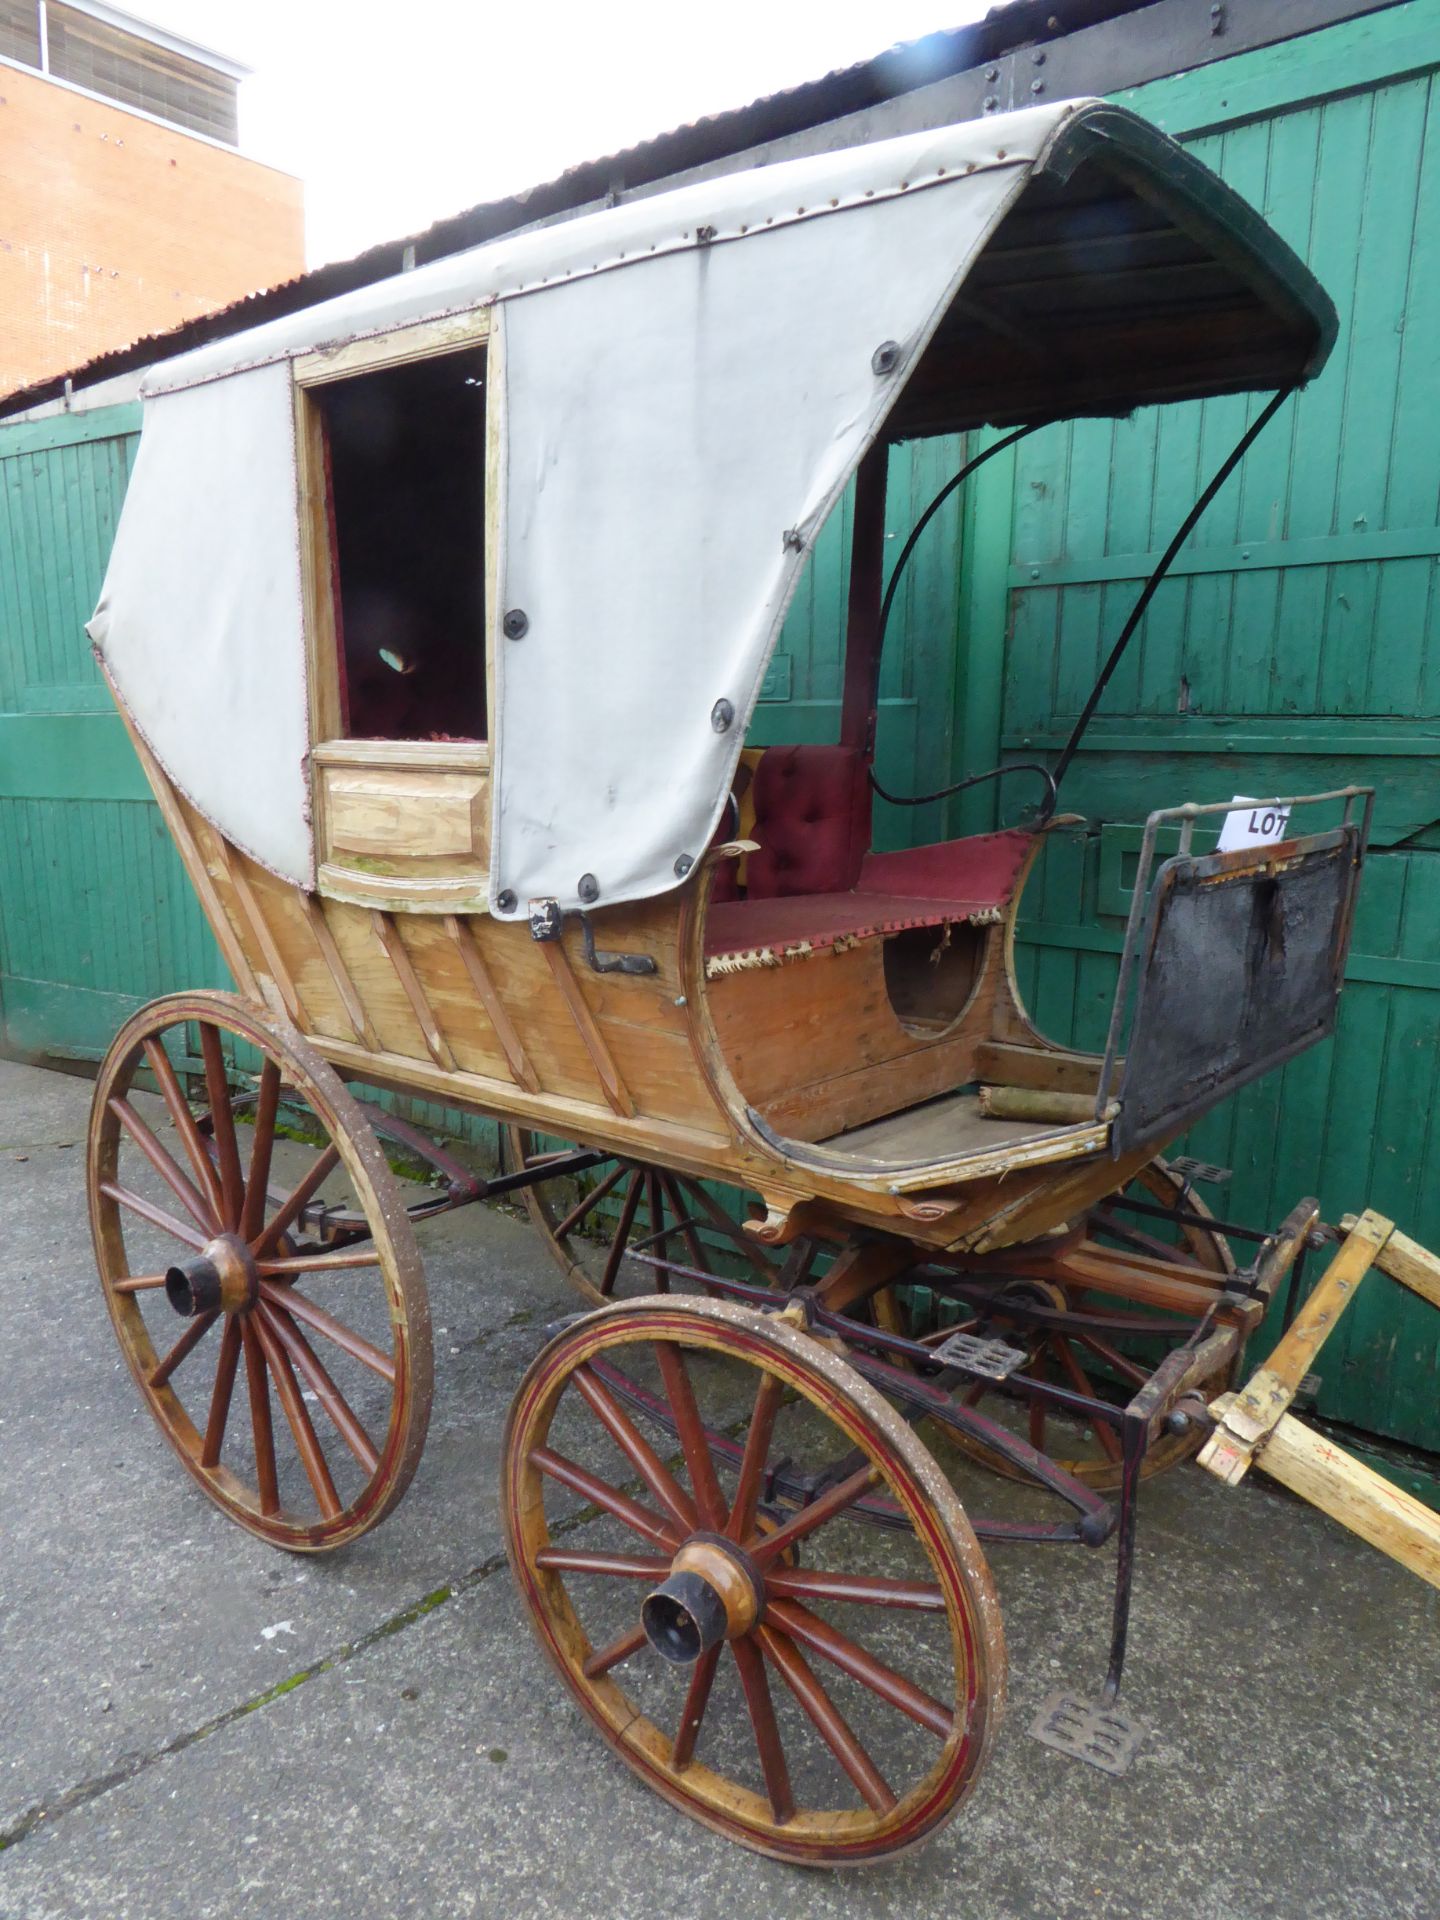 FOUR-WHEEL CARRIAGE for a single horse, possibly of Dutch origin, finished in natural varnished wood